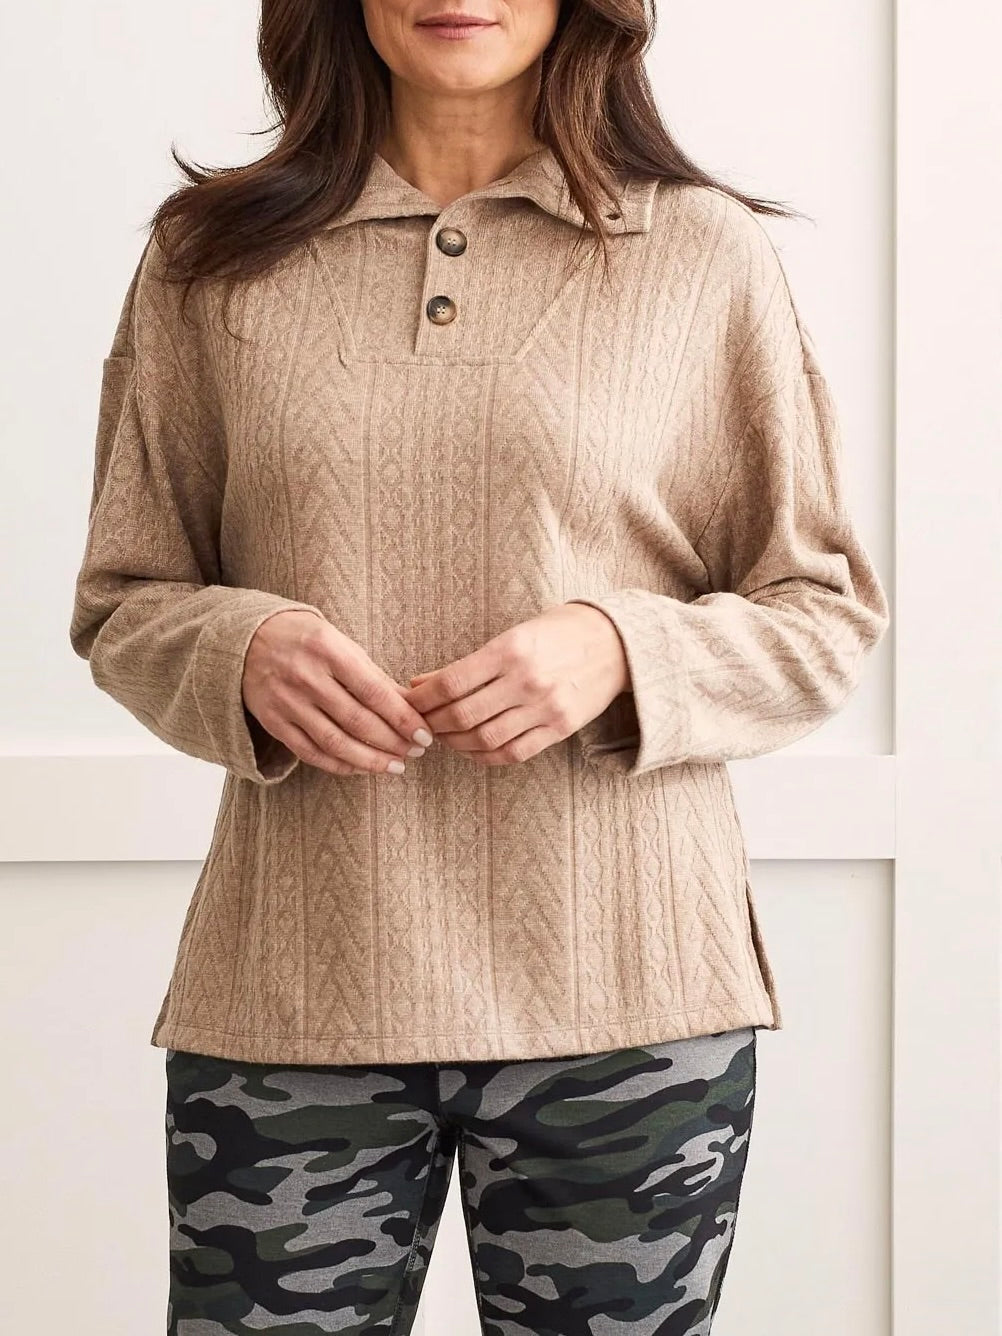 Funnel Neck Jacquard Top with Buttons - Cinnamon